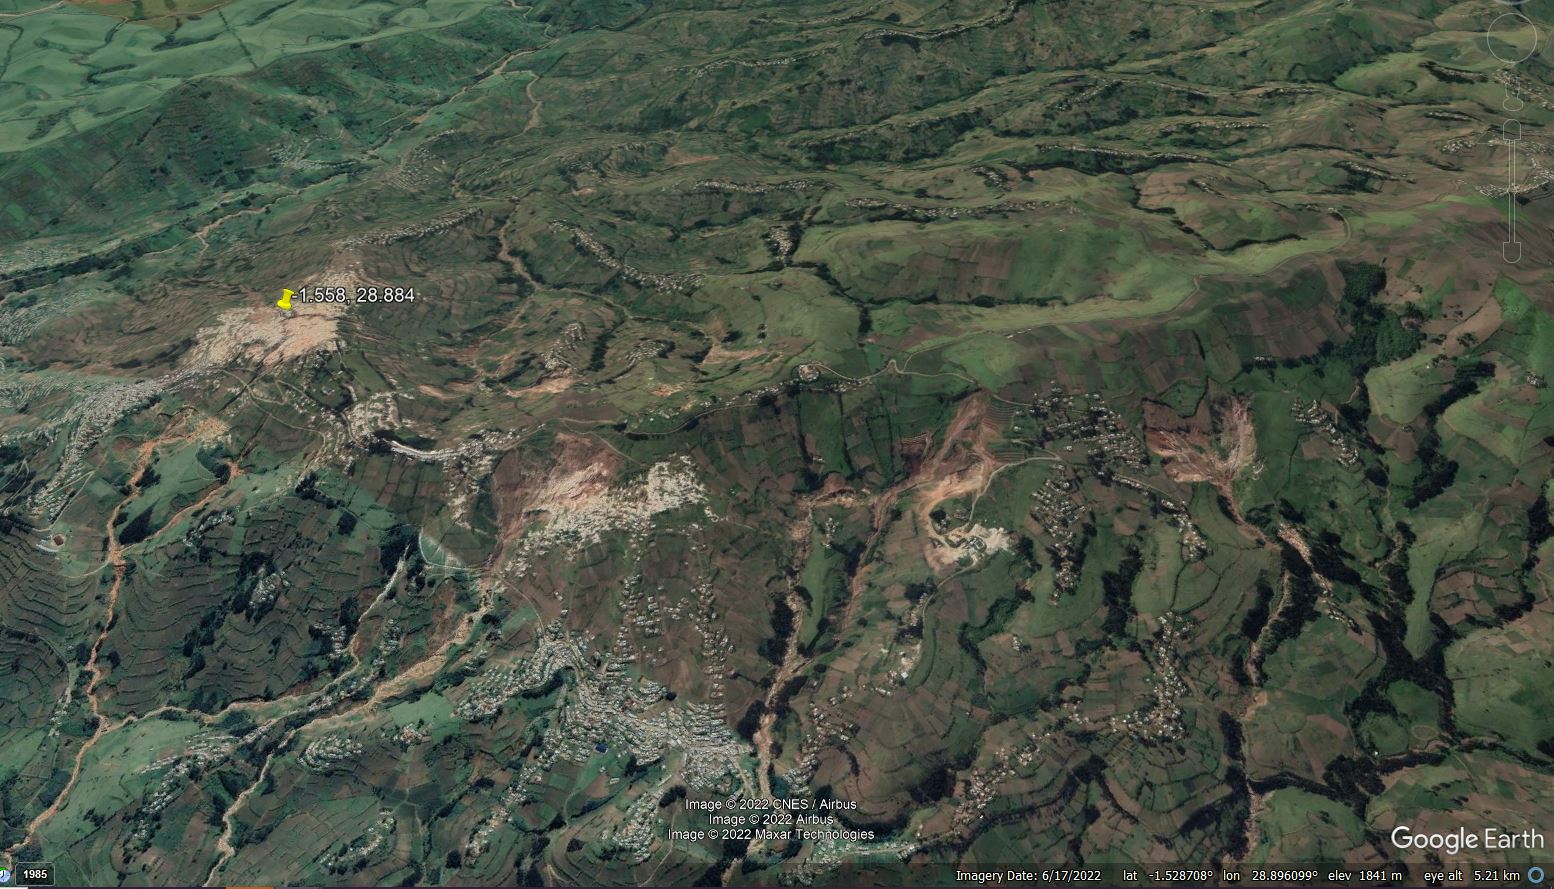 Google Earth imagery of the Coltan mines in the area of Rubaya in the Democratic republic of Congo.